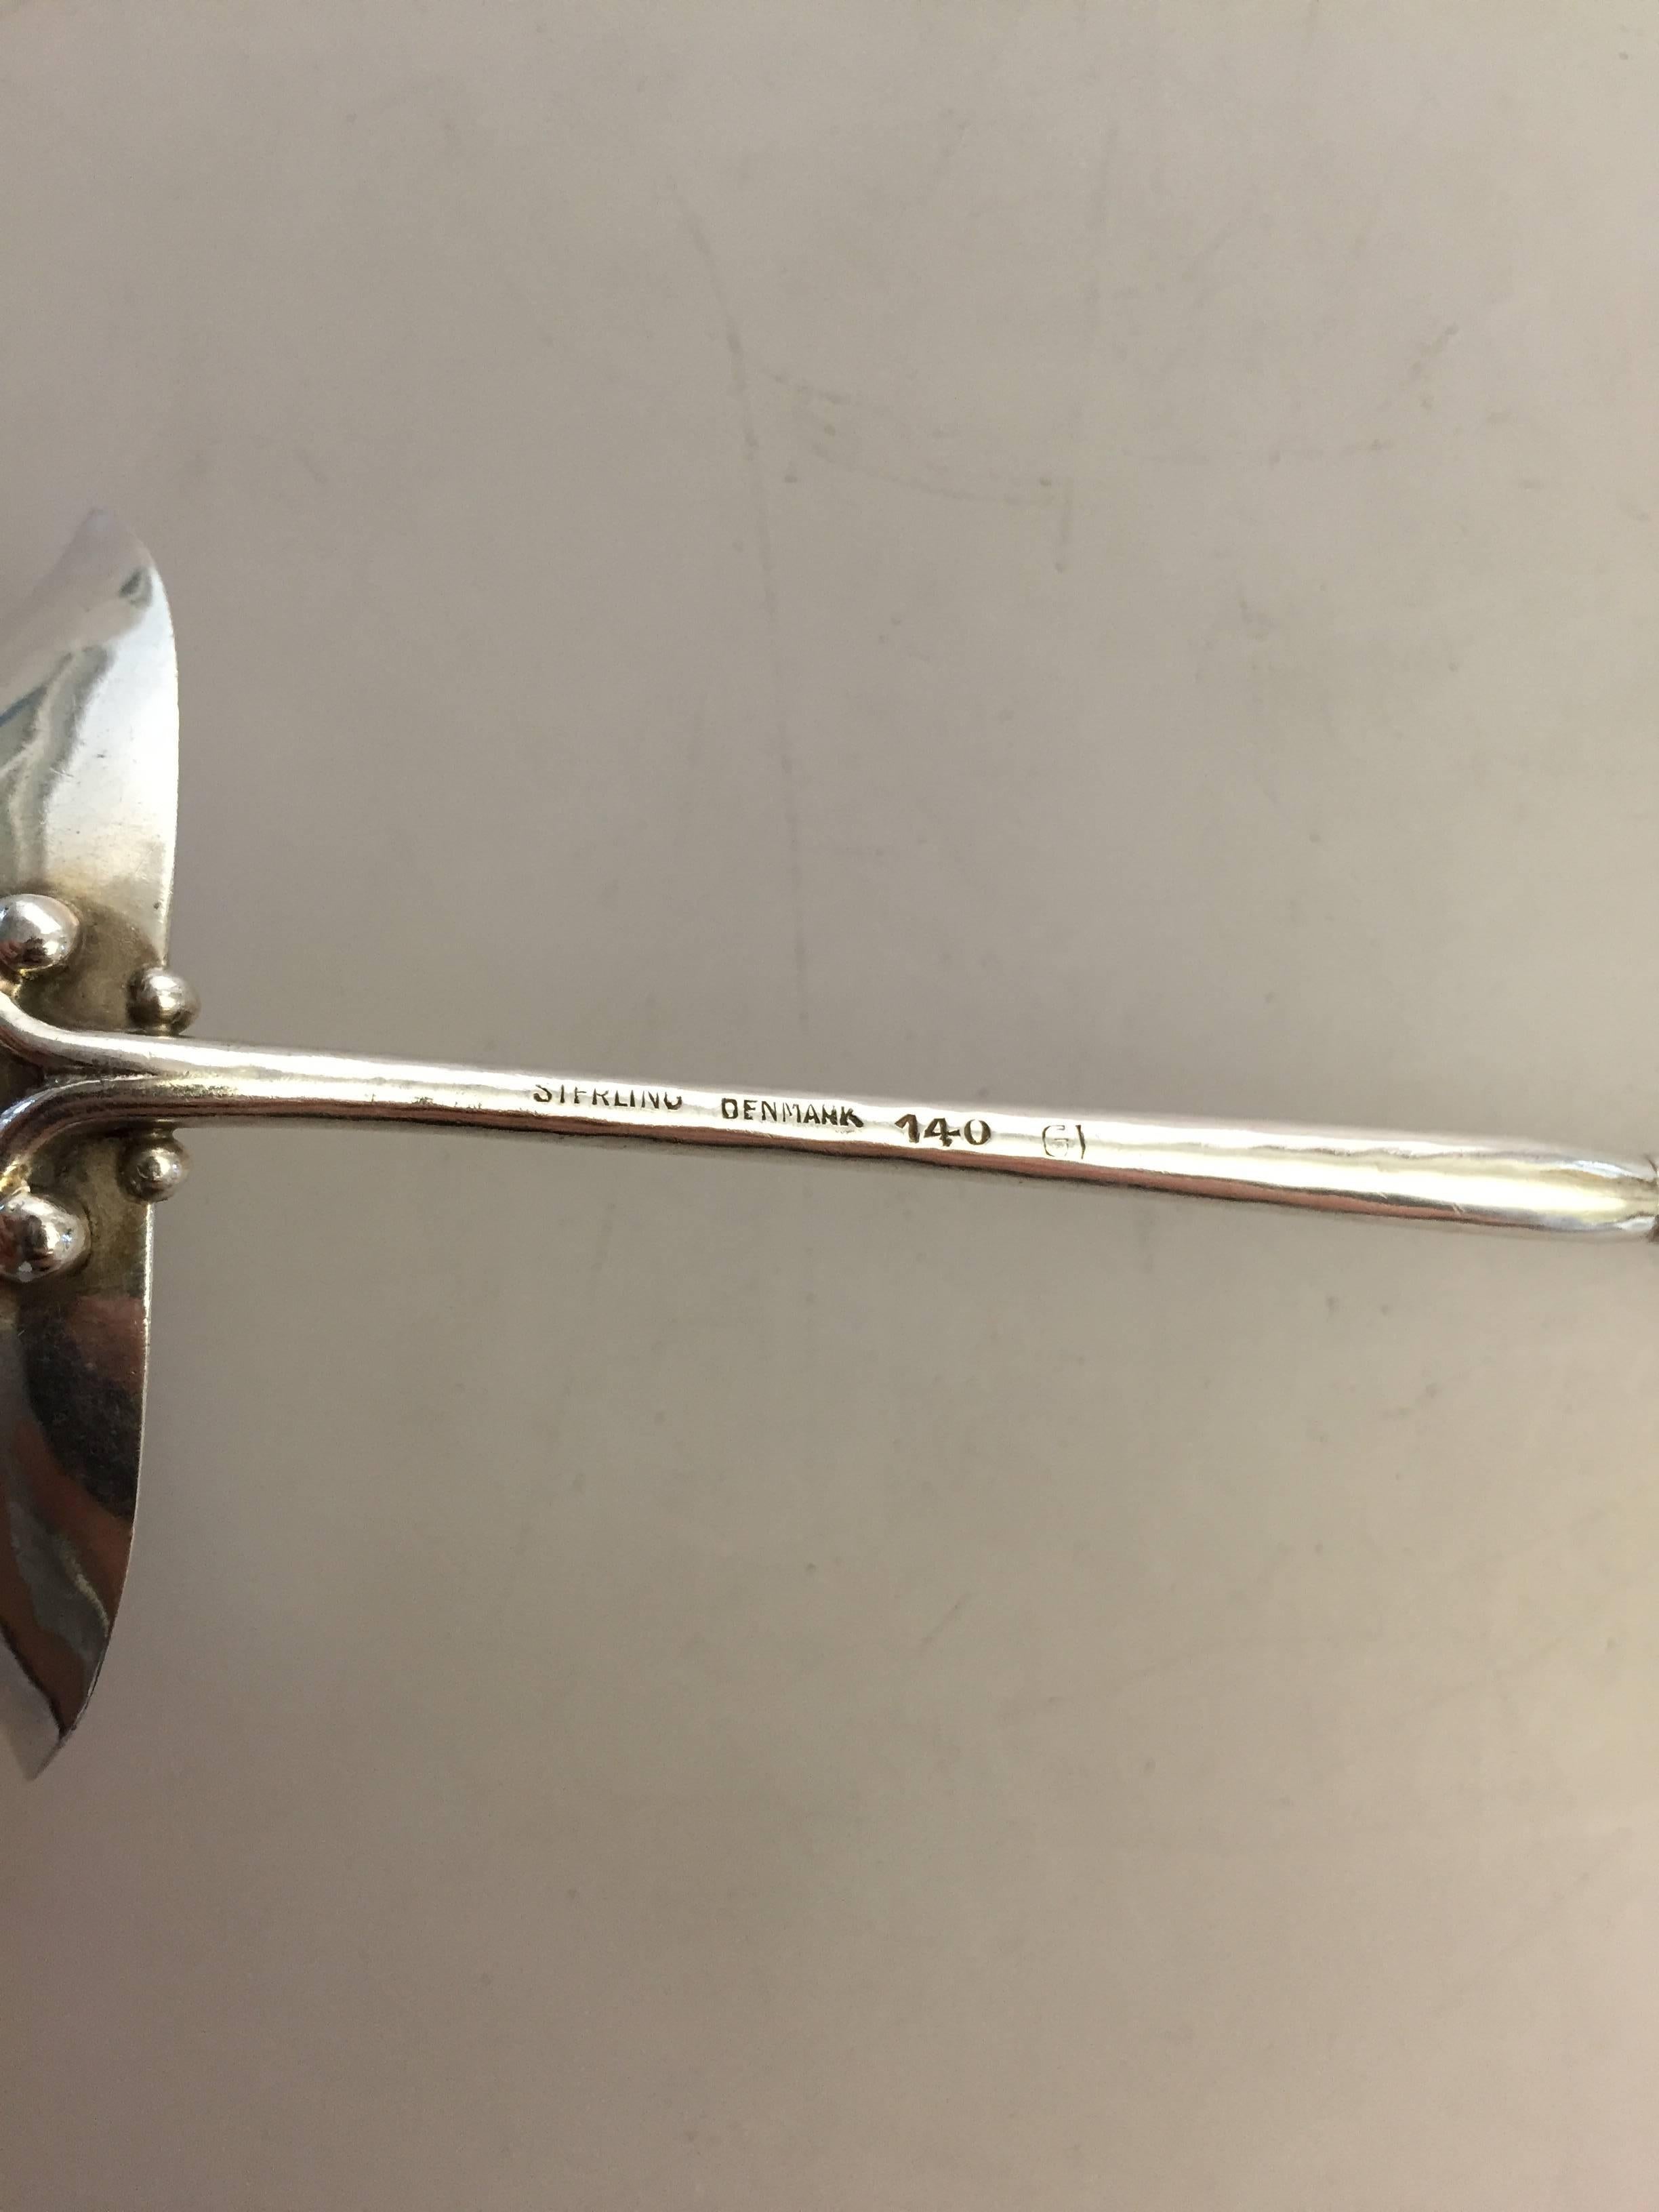 Early Georg Jensen sterling silver ornamental gravy spoon #140, from 1909-1914.

Measures: 14 cm.
Weighs 32 g / 1.15 oz.